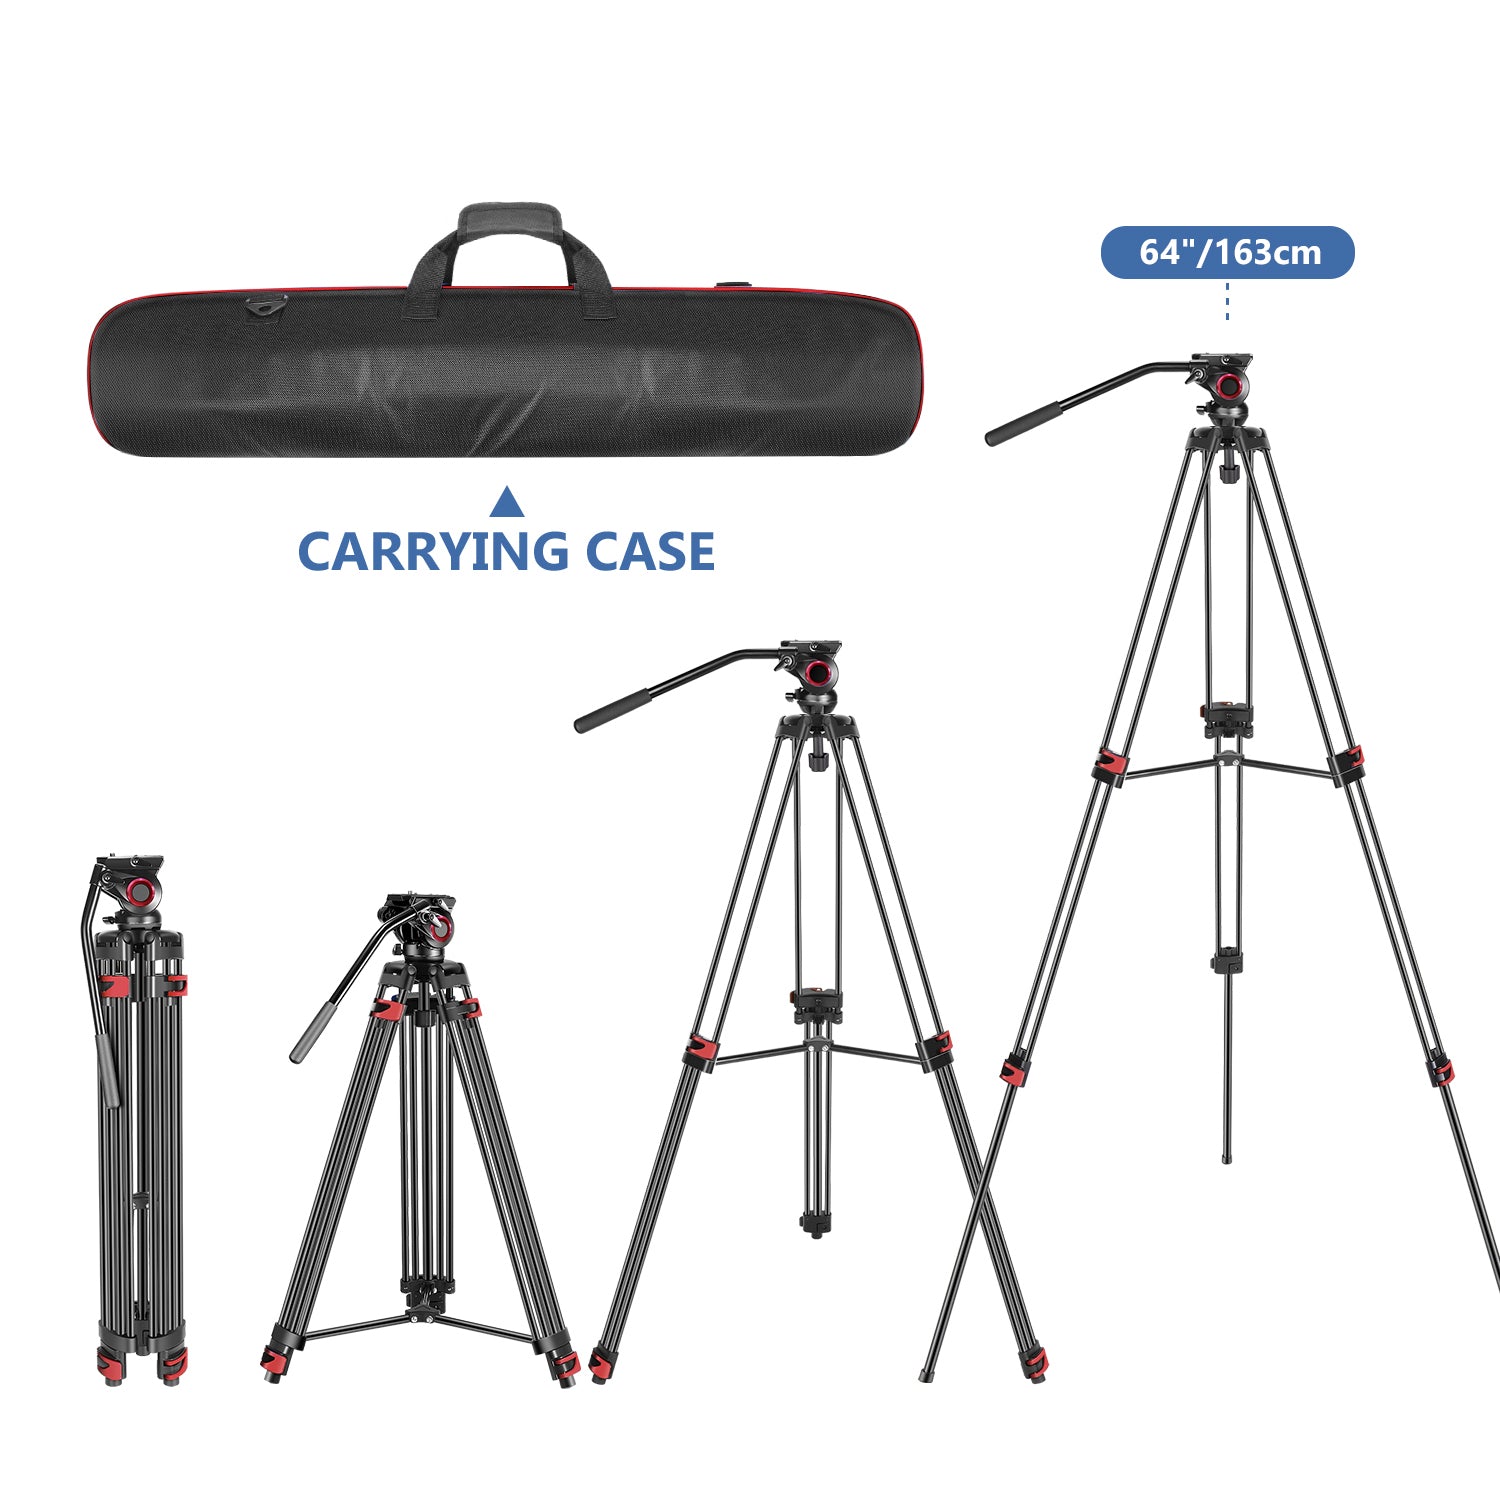 Neewer Professional Aluminum Alloy Video Camera Tripod with 360 Degree Fluid Drag Head,1/4 and 3/8-inch Quick Release Plate and Bag - neewer.com